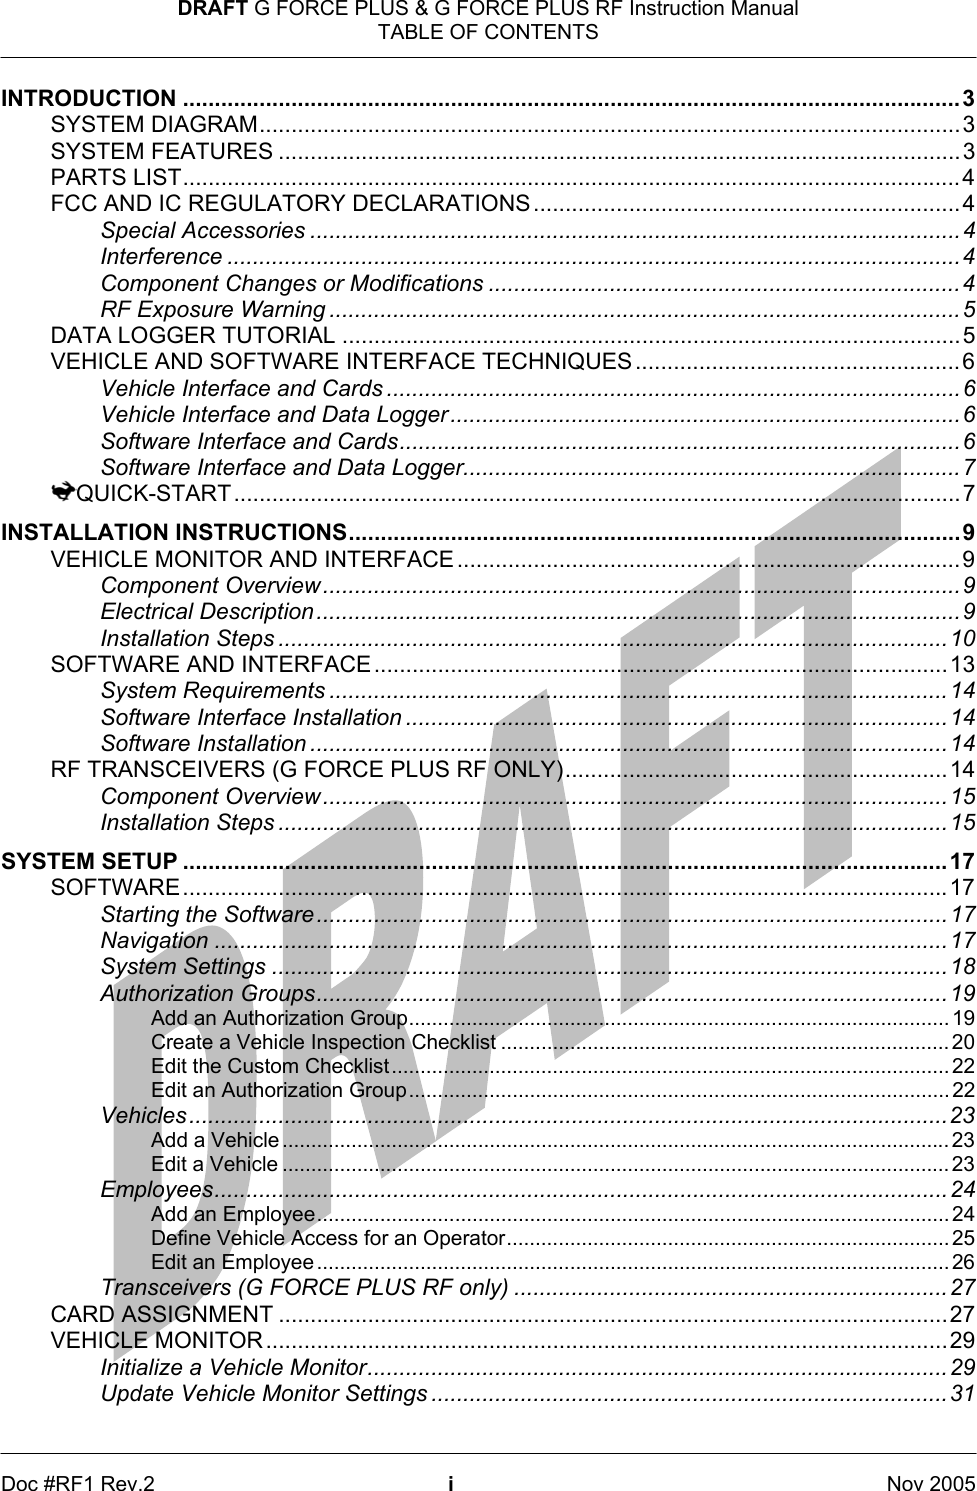 DRAFT G FORCE PLUS &amp; G FORCE PLUS RF Instruction Manual TABLE OF CONTENTS   Doc #RF1 Rev.2  i  Nov 2005 INTRODUCTION ..........................................................................................................................3 SYSTEM DIAGRAM..............................................................................................................3 SYSTEM FEATURES ...........................................................................................................3 PARTS LIST..........................................................................................................................4 FCC AND IC REGULATORY DECLARATIONS ...................................................................4 Special Accessories ......................................................................................................4 Interference ...................................................................................................................4 Component Changes or Modifications ..........................................................................4 RF Exposure Warning ...................................................................................................5 DATA LOGGER TUTORIAL .................................................................................................5 VEHICLE AND SOFTWARE INTERFACE TECHNIQUES ...................................................6 Vehicle Interface and Cards ..........................................................................................6 Vehicle Interface and Data Logger................................................................................6 Software Interface and Cards........................................................................................6 Software Interface and Data Logger..............................................................................7 QUICK-START..................................................................................................................7 INSTALLATION INSTRUCTIONS................................................................................................9 VEHICLE MONITOR AND INTERFACE ...............................................................................9 Component Overview....................................................................................................9 Electrical Description.....................................................................................................9 Installation Steps .........................................................................................................10 SOFTWARE AND INTERFACE..........................................................................................13 System Requirements .................................................................................................14 Software Interface Installation .....................................................................................14 Software Installation ....................................................................................................14 RF TRANSCEIVERS (G FORCE PLUS RF ONLY)............................................................14 Component Overview..................................................................................................15 Installation Steps .........................................................................................................15 SYSTEM SETUP ........................................................................................................................17 SOFTWARE........................................................................................................................17 Starting the Software...................................................................................................17 Navigation ...................................................................................................................17 System Settings ..........................................................................................................18 Authorization Groups...................................................................................................19 Add an Authorization Group..............................................................................................19 Create a Vehicle Inspection Checklist ..............................................................................20 Edit the Custom Checklist................................................................................................. 22 Edit an Authorization Group.............................................................................................. 22 Vehicles.......................................................................................................................23 Add a Vehicle .................................................................................................................... 23 Edit a Vehicle .................................................................................................................... 23 Employees...................................................................................................................24 Add an Employee.............................................................................................................. 24 Define Vehicle Access for an Operator............................................................................. 25 Edit an Employee .............................................................................................................. 26 Transceivers (G FORCE PLUS RF only) ....................................................................27 CARD ASSIGNMENT .........................................................................................................27 VEHICLE MONITOR...........................................................................................................29 Initialize a Vehicle Monitor...........................................................................................29 Update Vehicle Monitor Settings .................................................................................31 